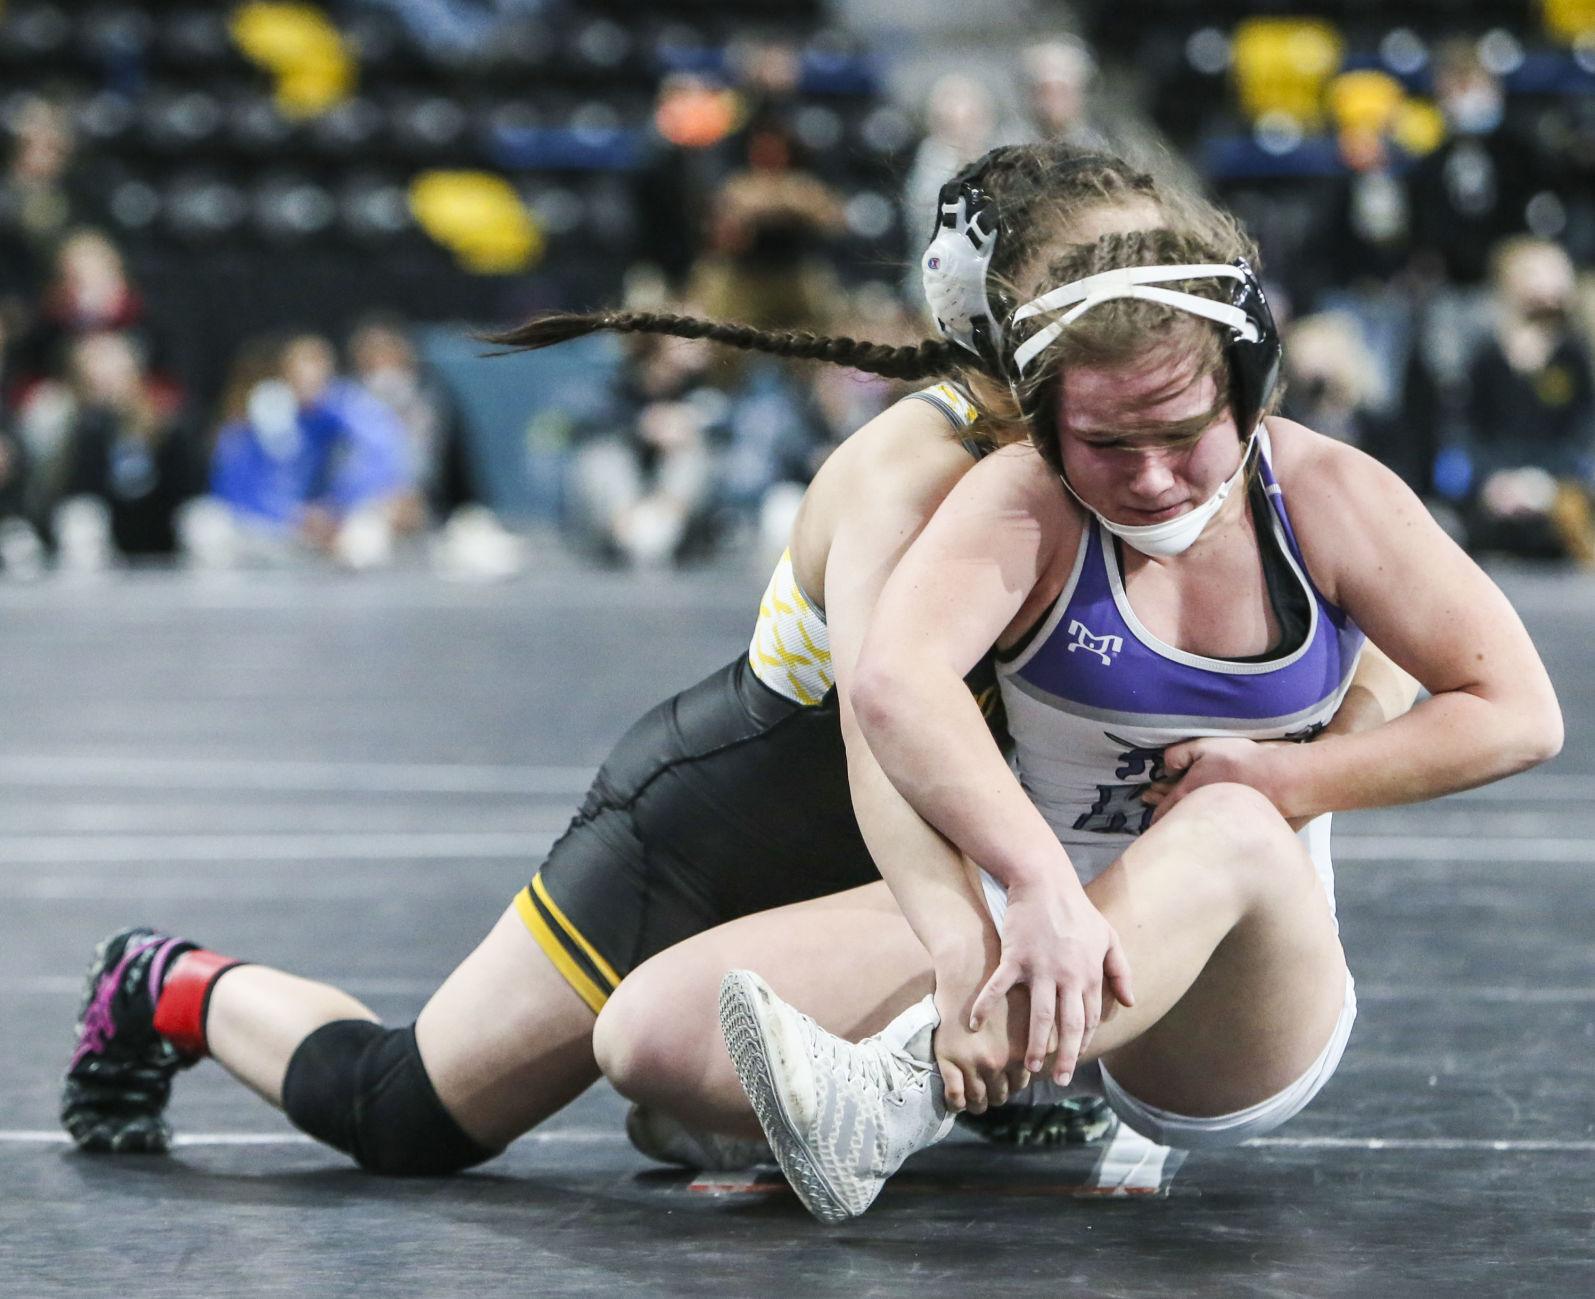 Photos Iowa Wrestling Coaches and Official Association's girls state